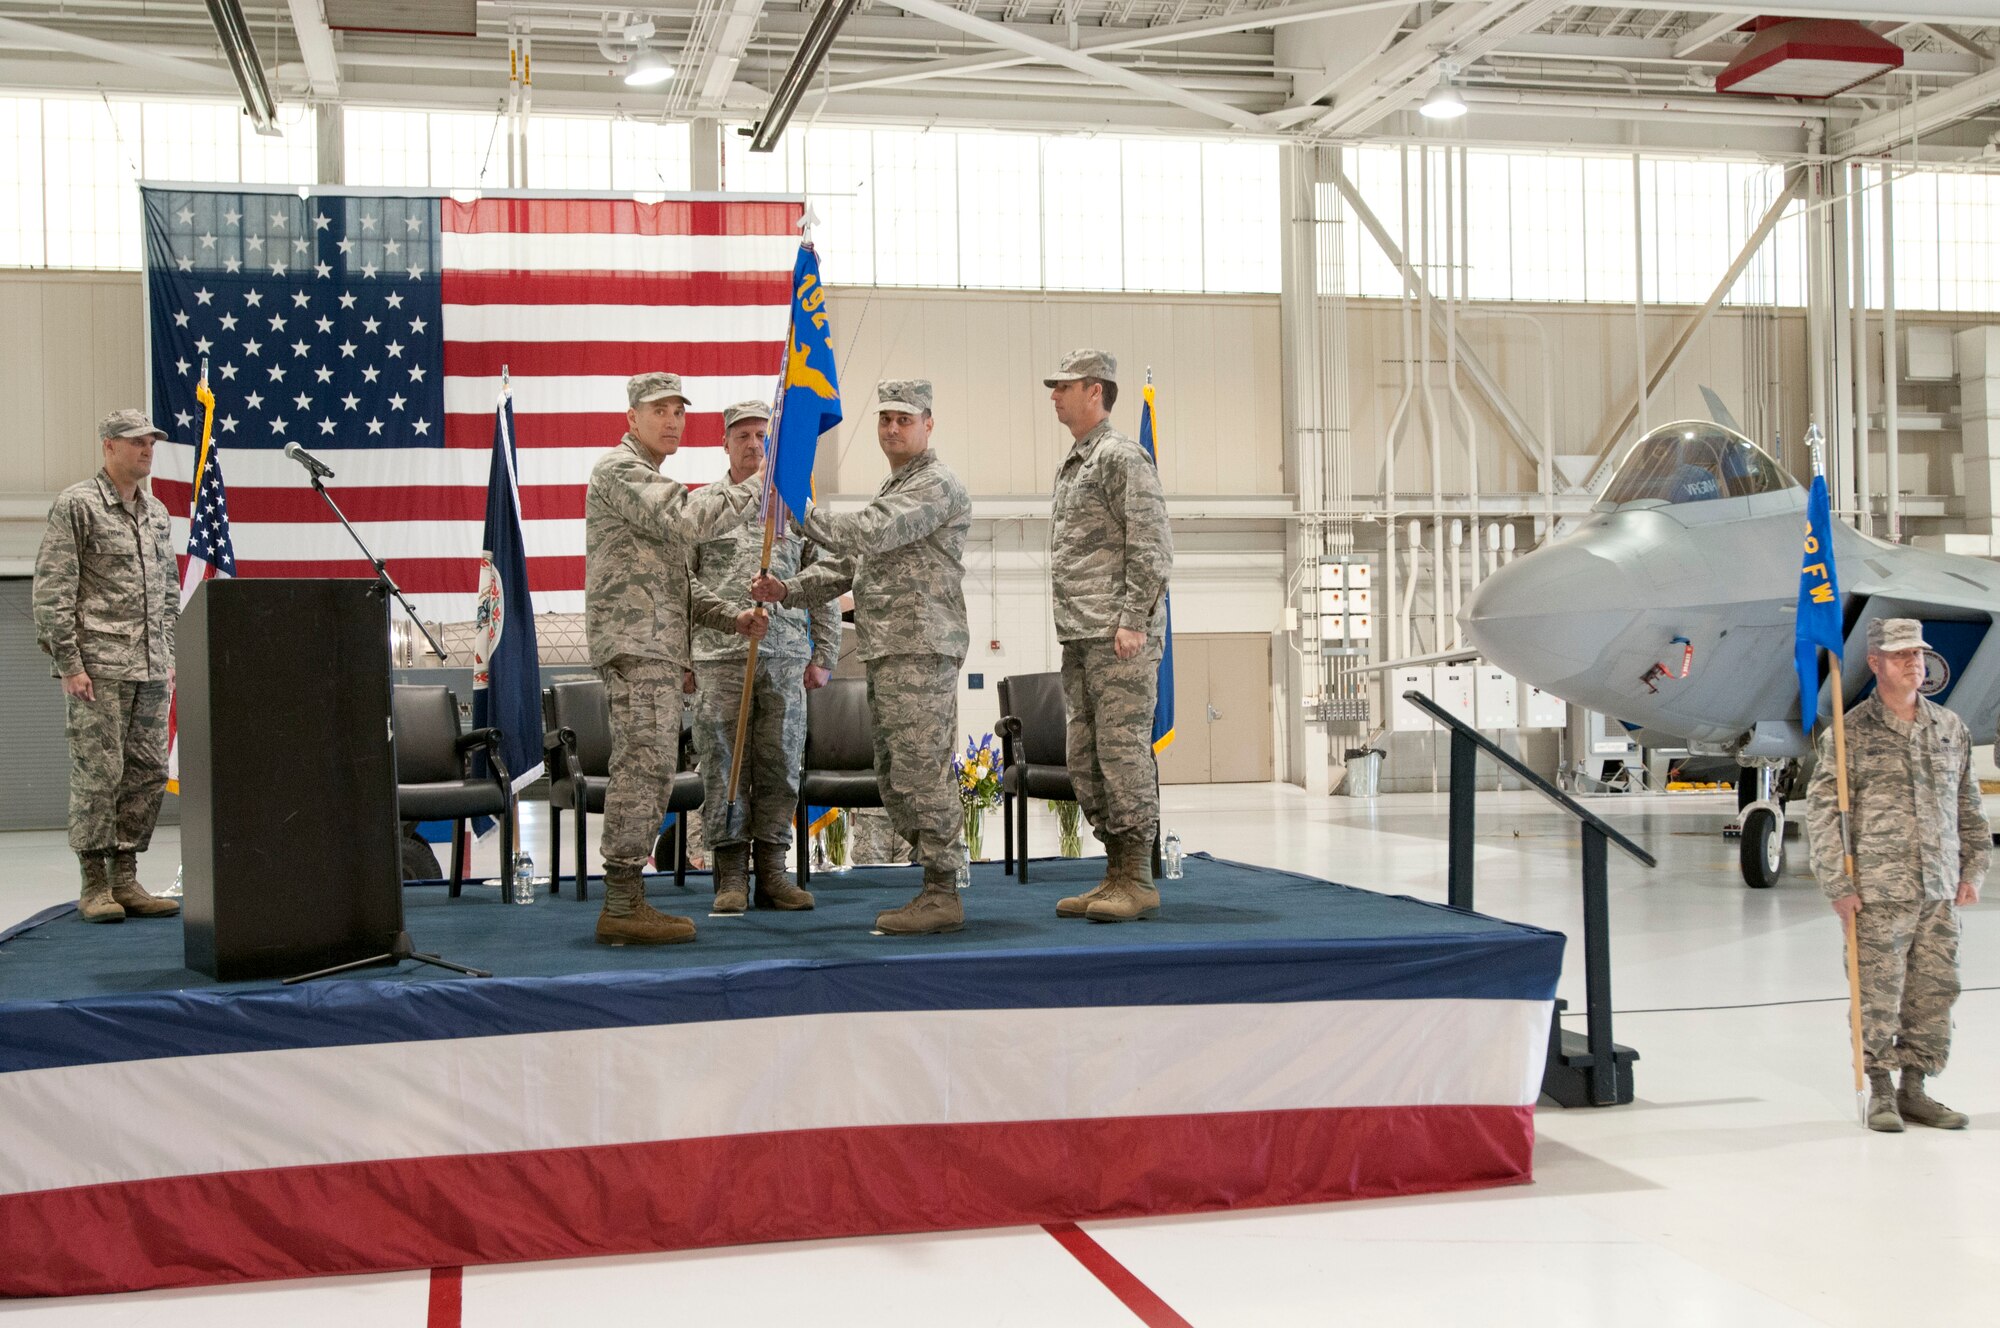 The Virginia Air National Guard 192nd Fighter Wing welcomed Col. Stephen H. Bunting, former 192nd Maintenance Group commander, as the new Wing commander during a joint change of command ceremony March 19, 2016, at Joint Base Langley-Eustis, Virginia. (U.S. Air National Guard photo by Technical Sgt. Jonathan P. Garcia)